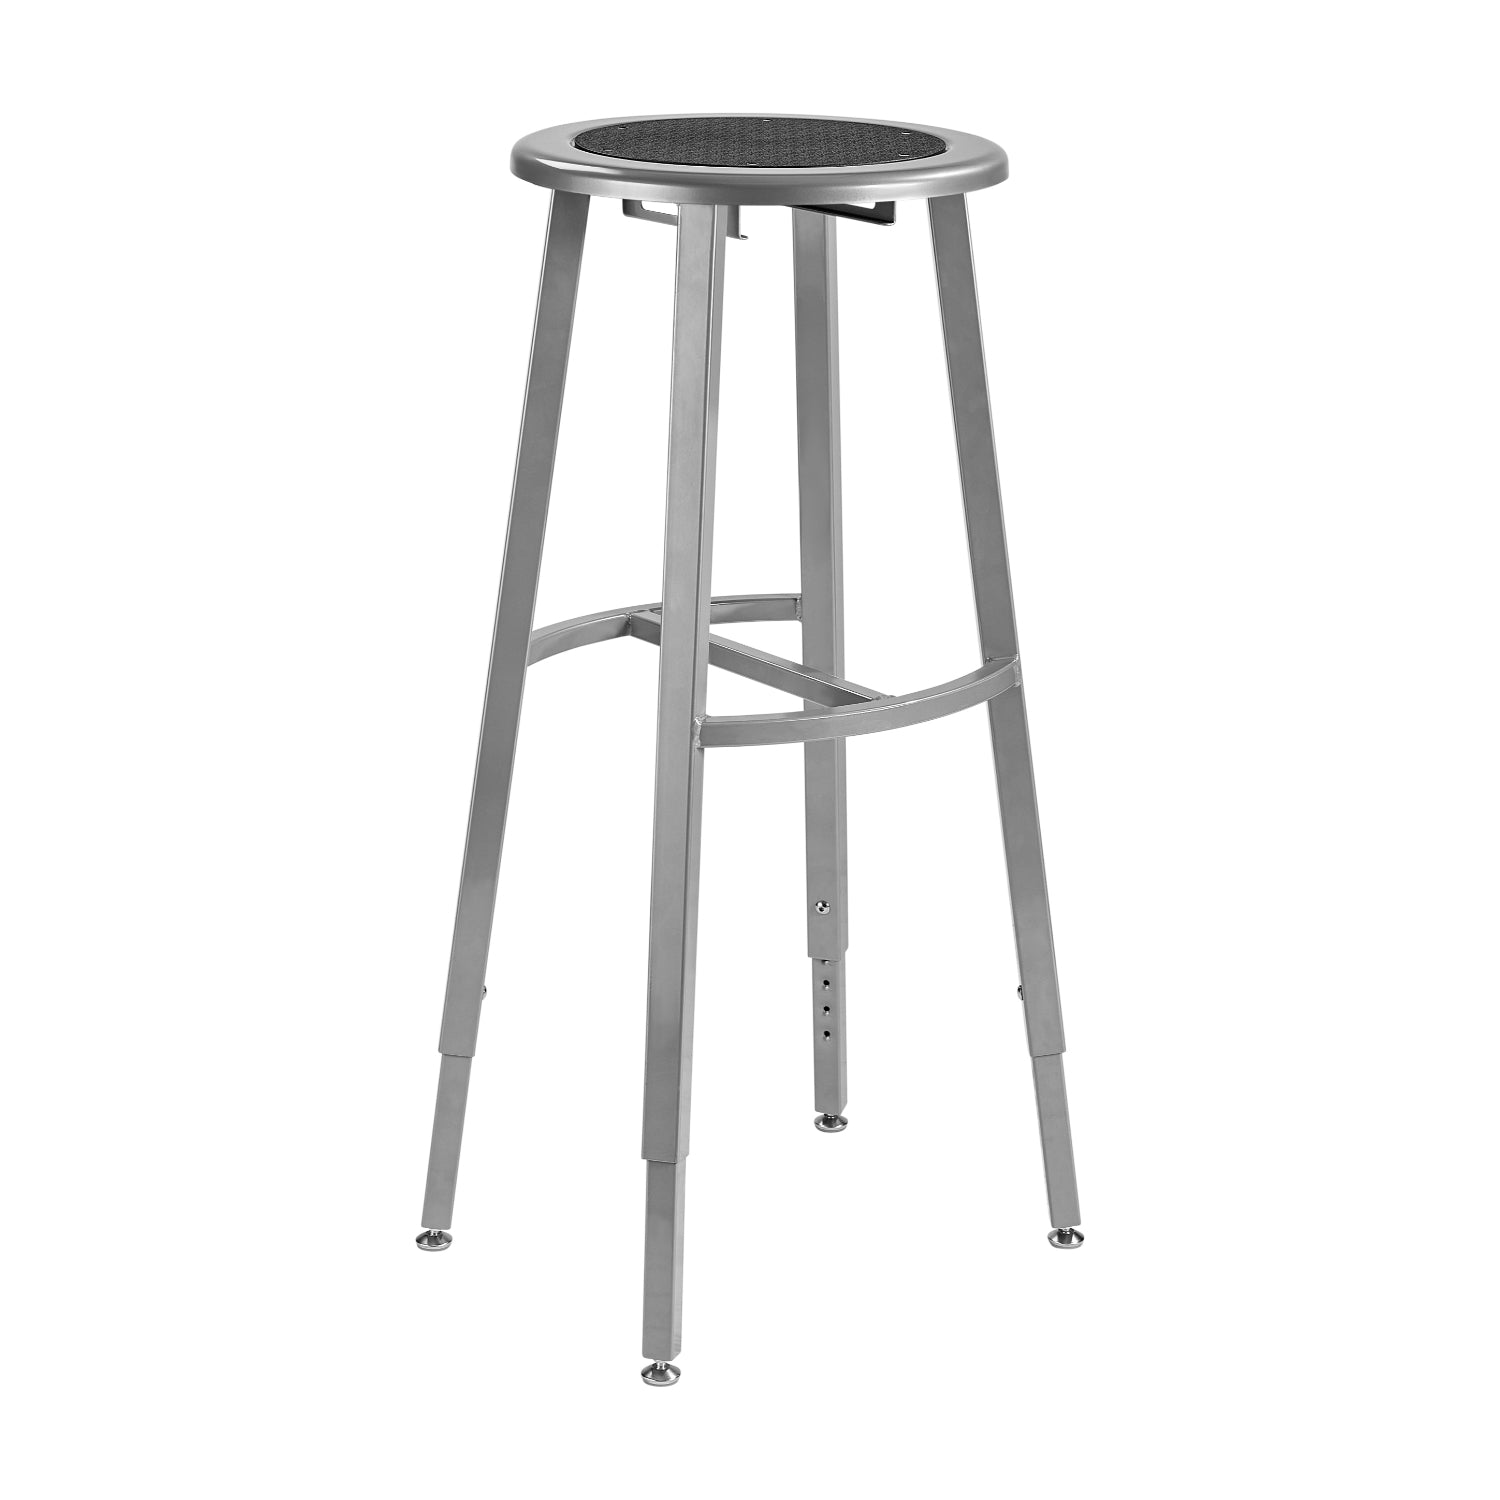 Titan Adjustable Height Stool, Steel Seat with Black Poly Center, 30-38" Seat Height